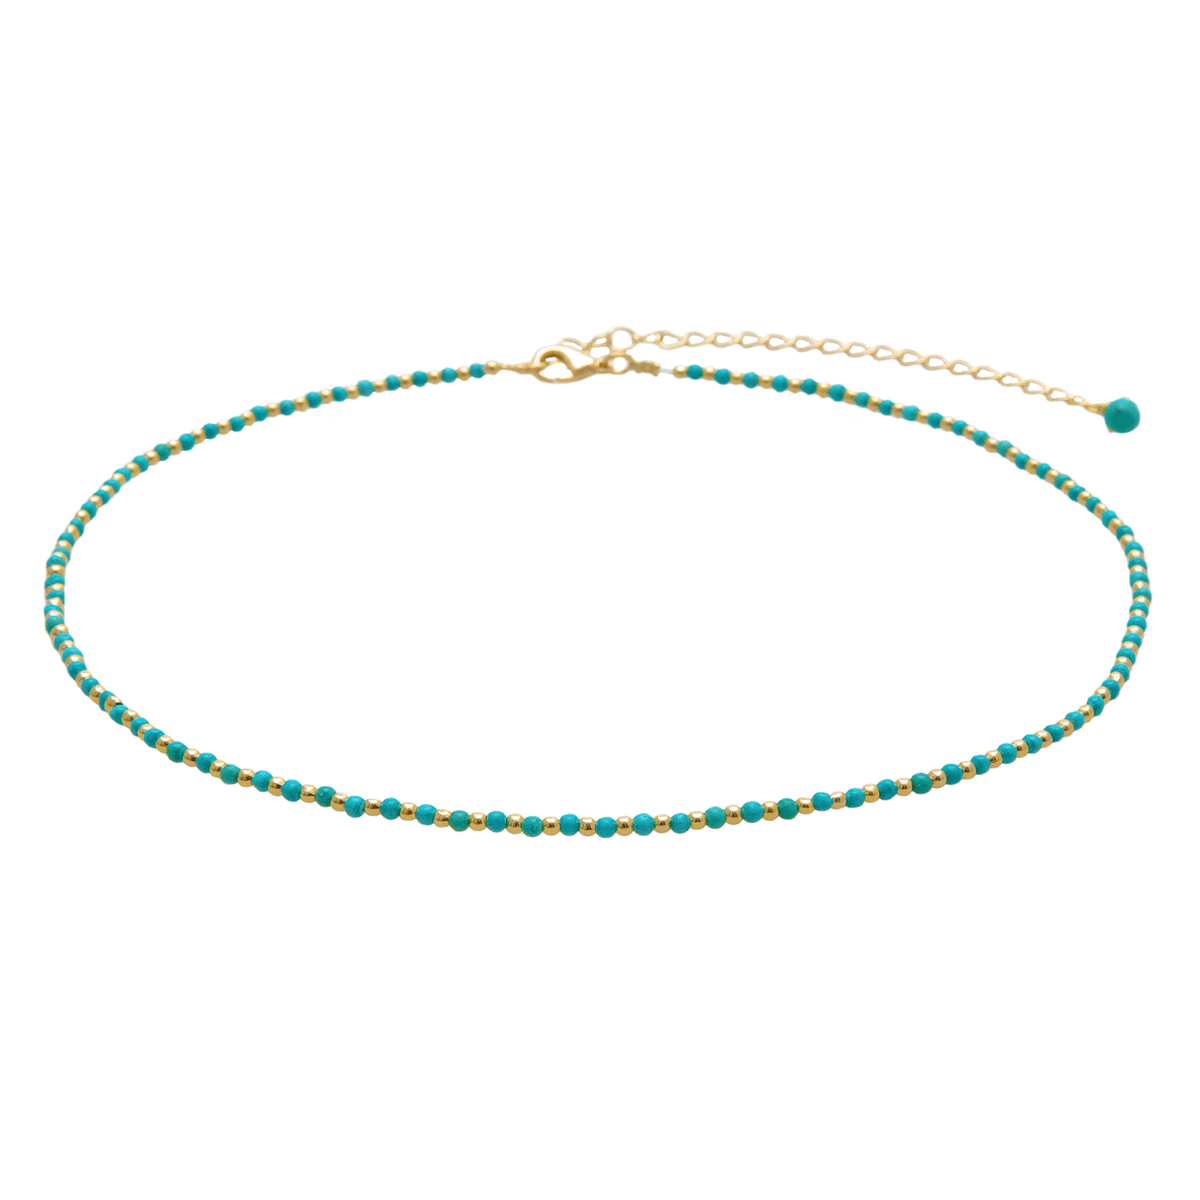 2mm turquoise stone and gold bead healing necklace